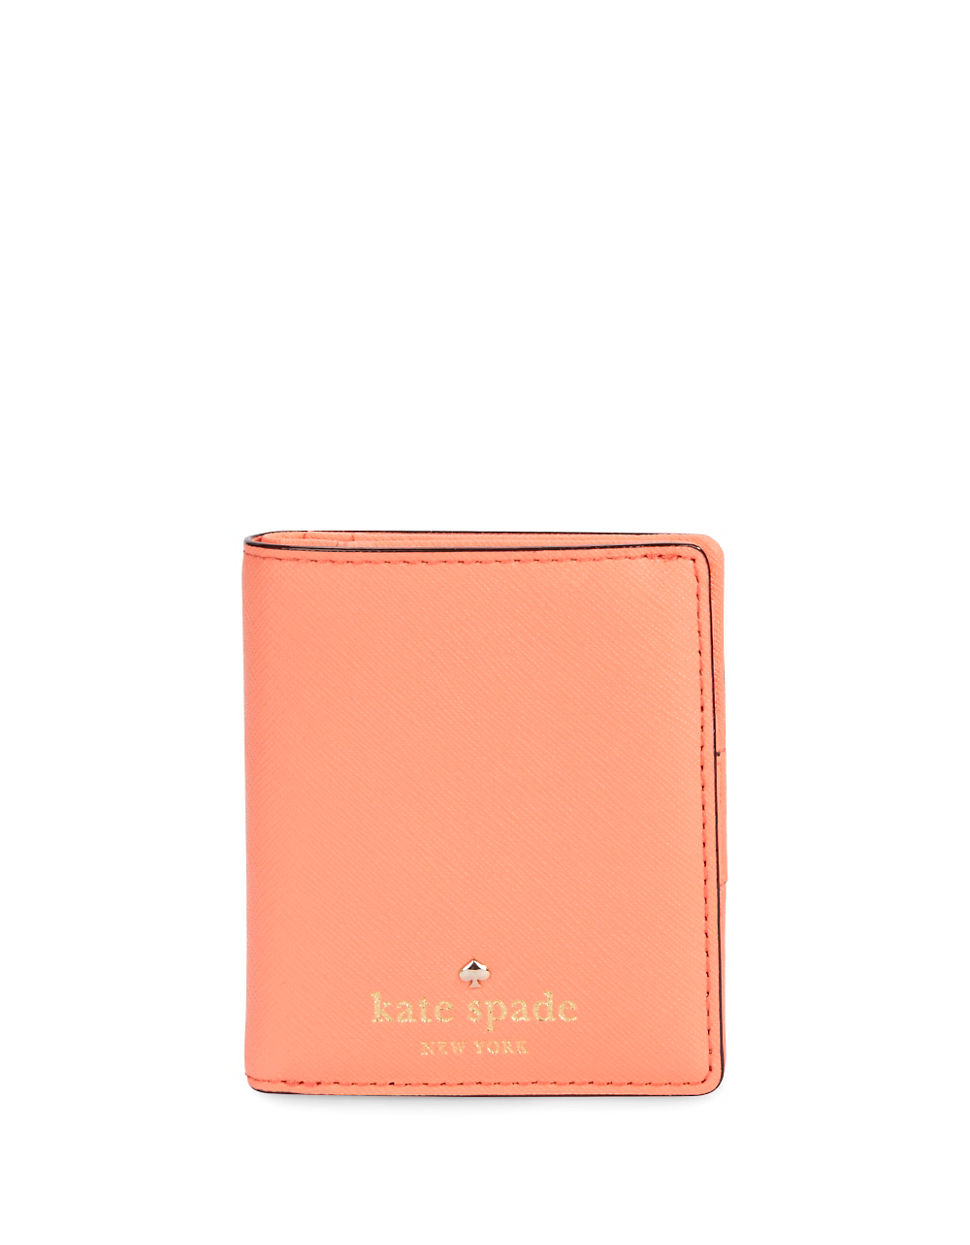 Kate Spade Small Stacy Wallet in Orange (Guava) | Lyst